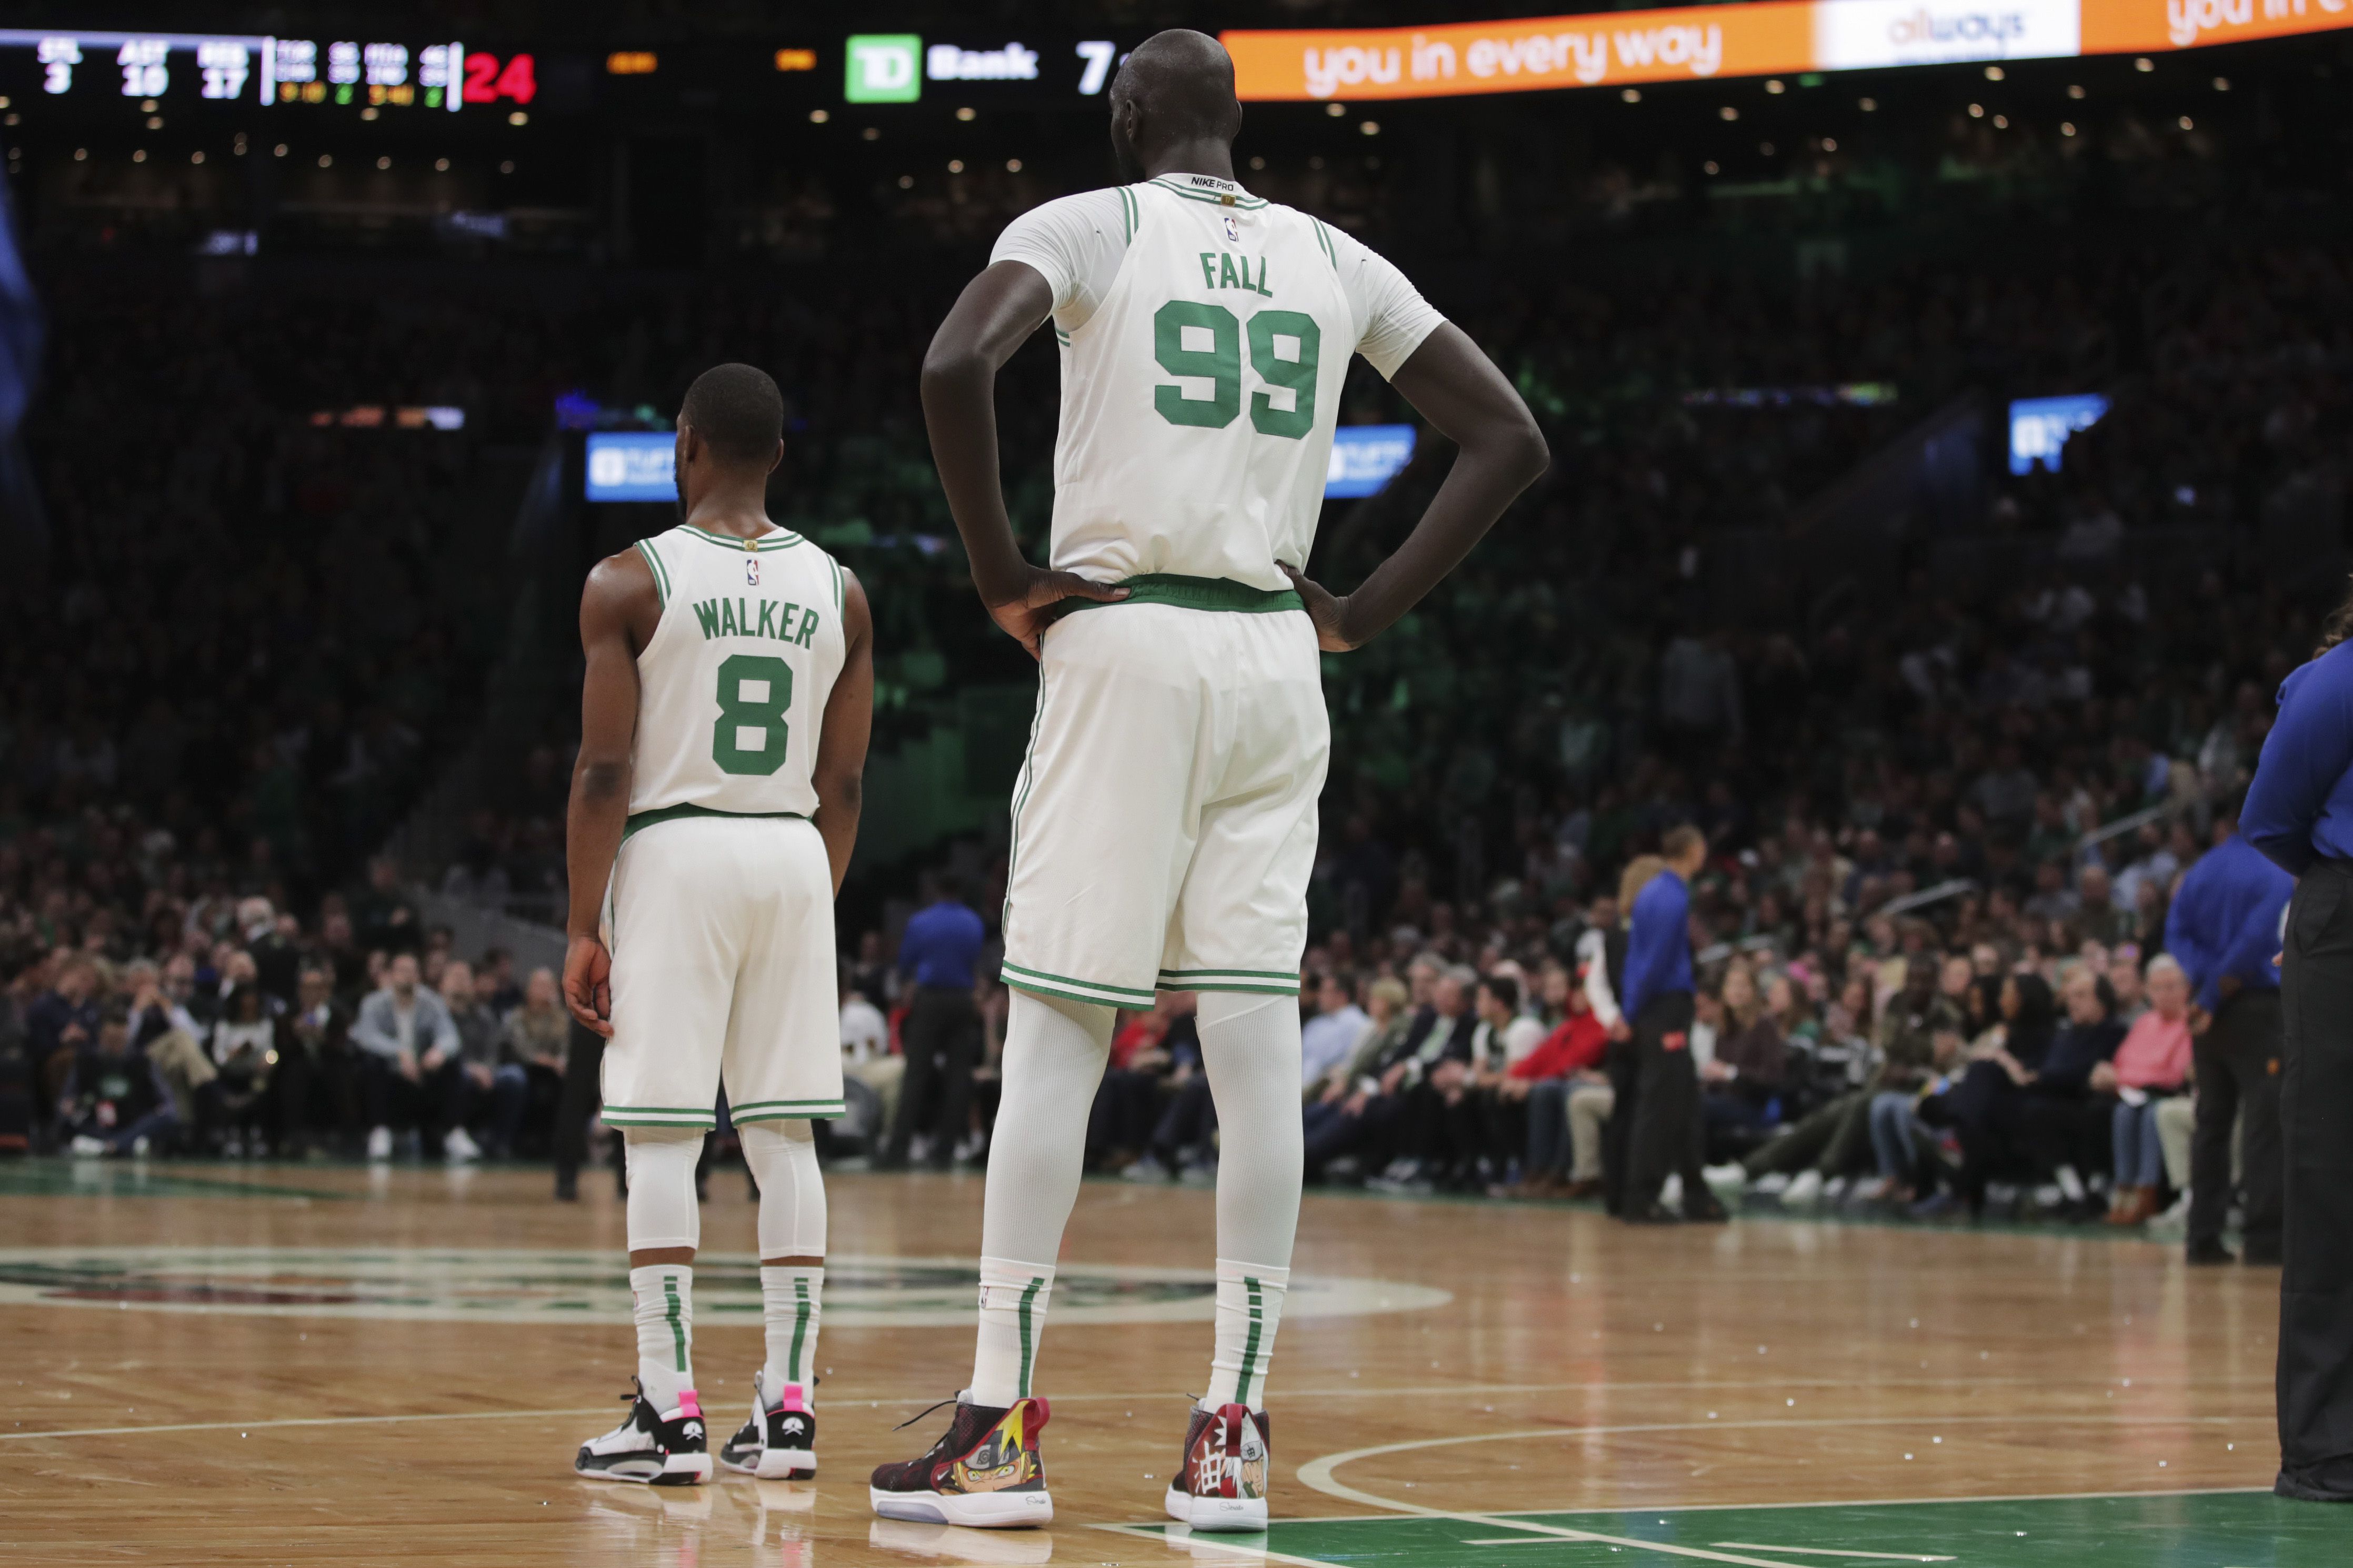 Tacko Fall and Tremont Waters return to Celtics on two-way deals